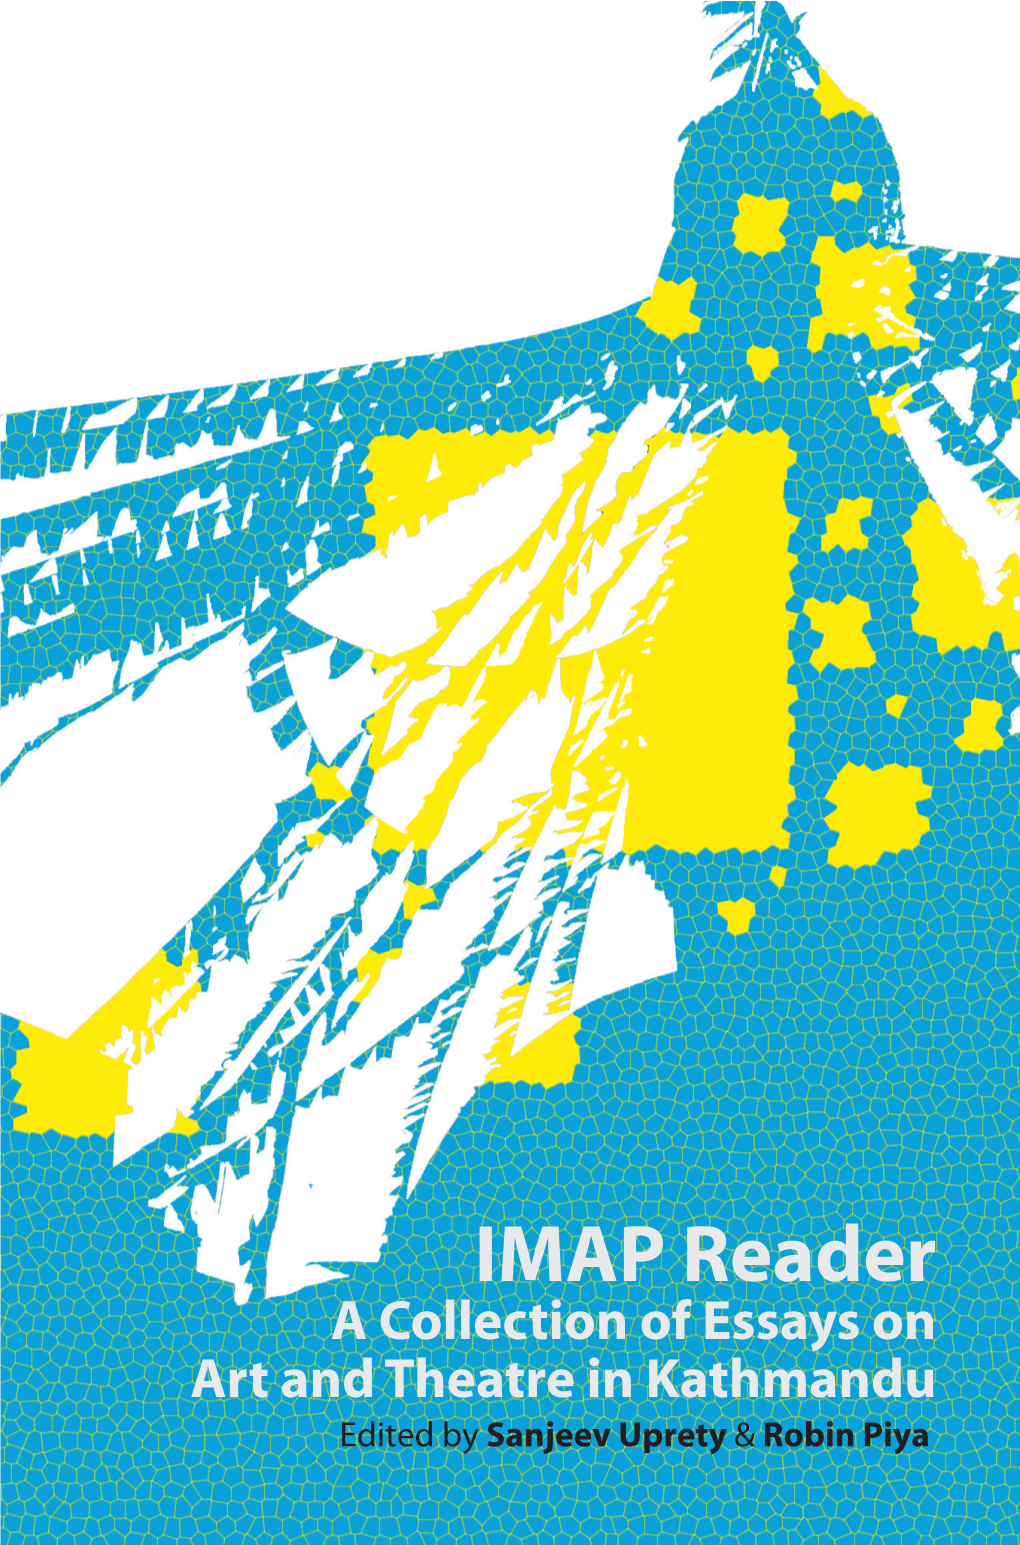 IMAP Reader: a Collection of Essays and on Art Theatre in Kathmandu